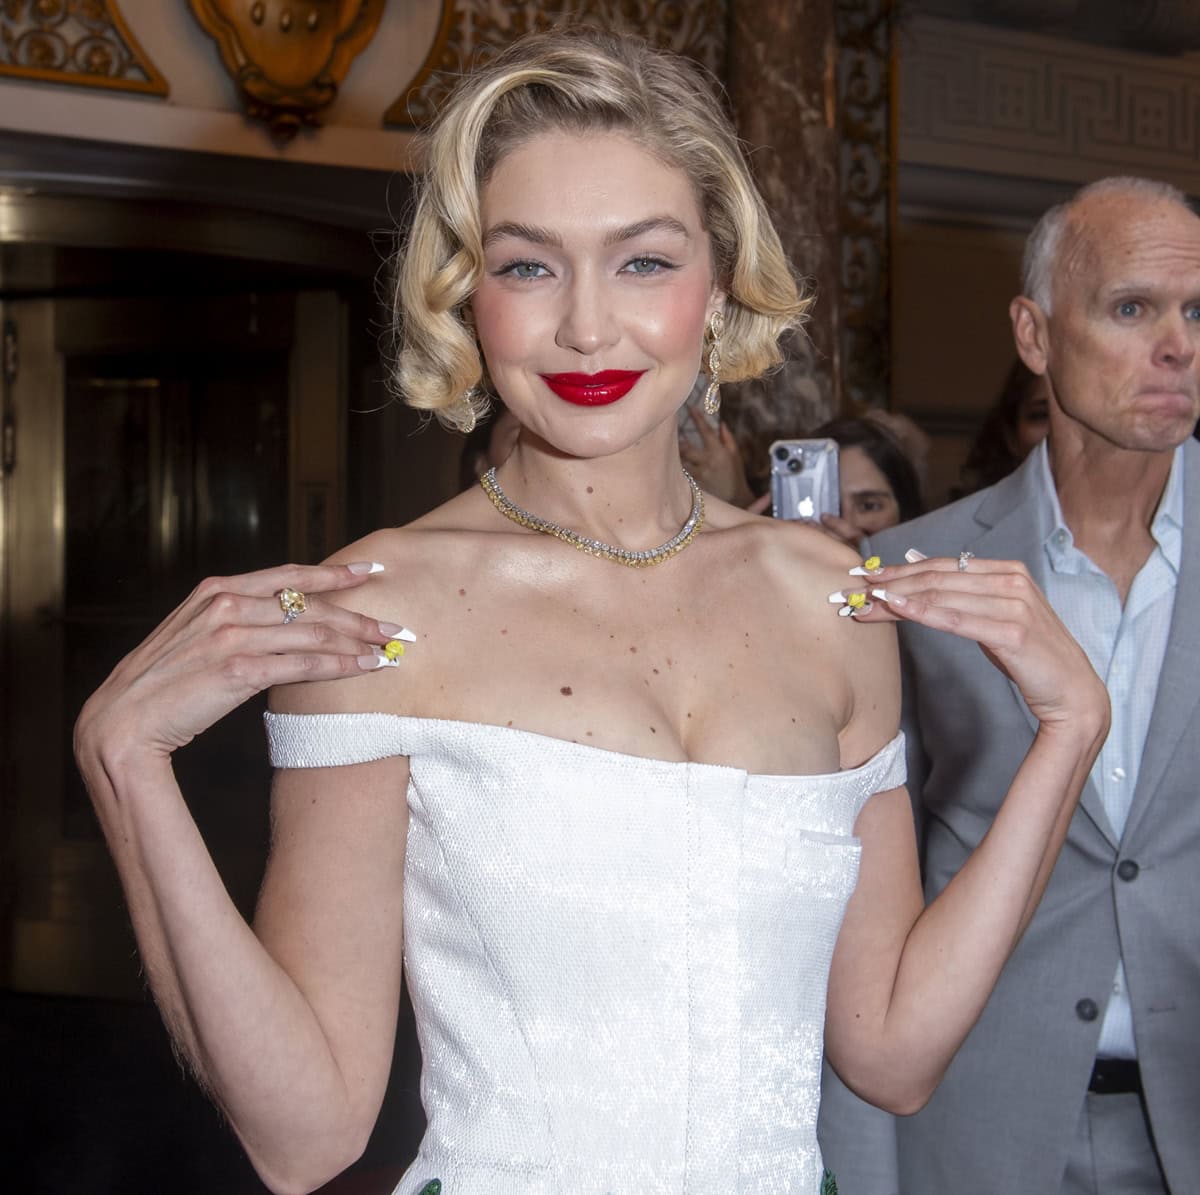 Gigi Hadid sparkles at the Met Gala with a touch of classic glamour: a bold red lip, a precision-cut bob, and a manicure that mirrors the garden theme, complemented by Chopard's exquisite diamond jewelry